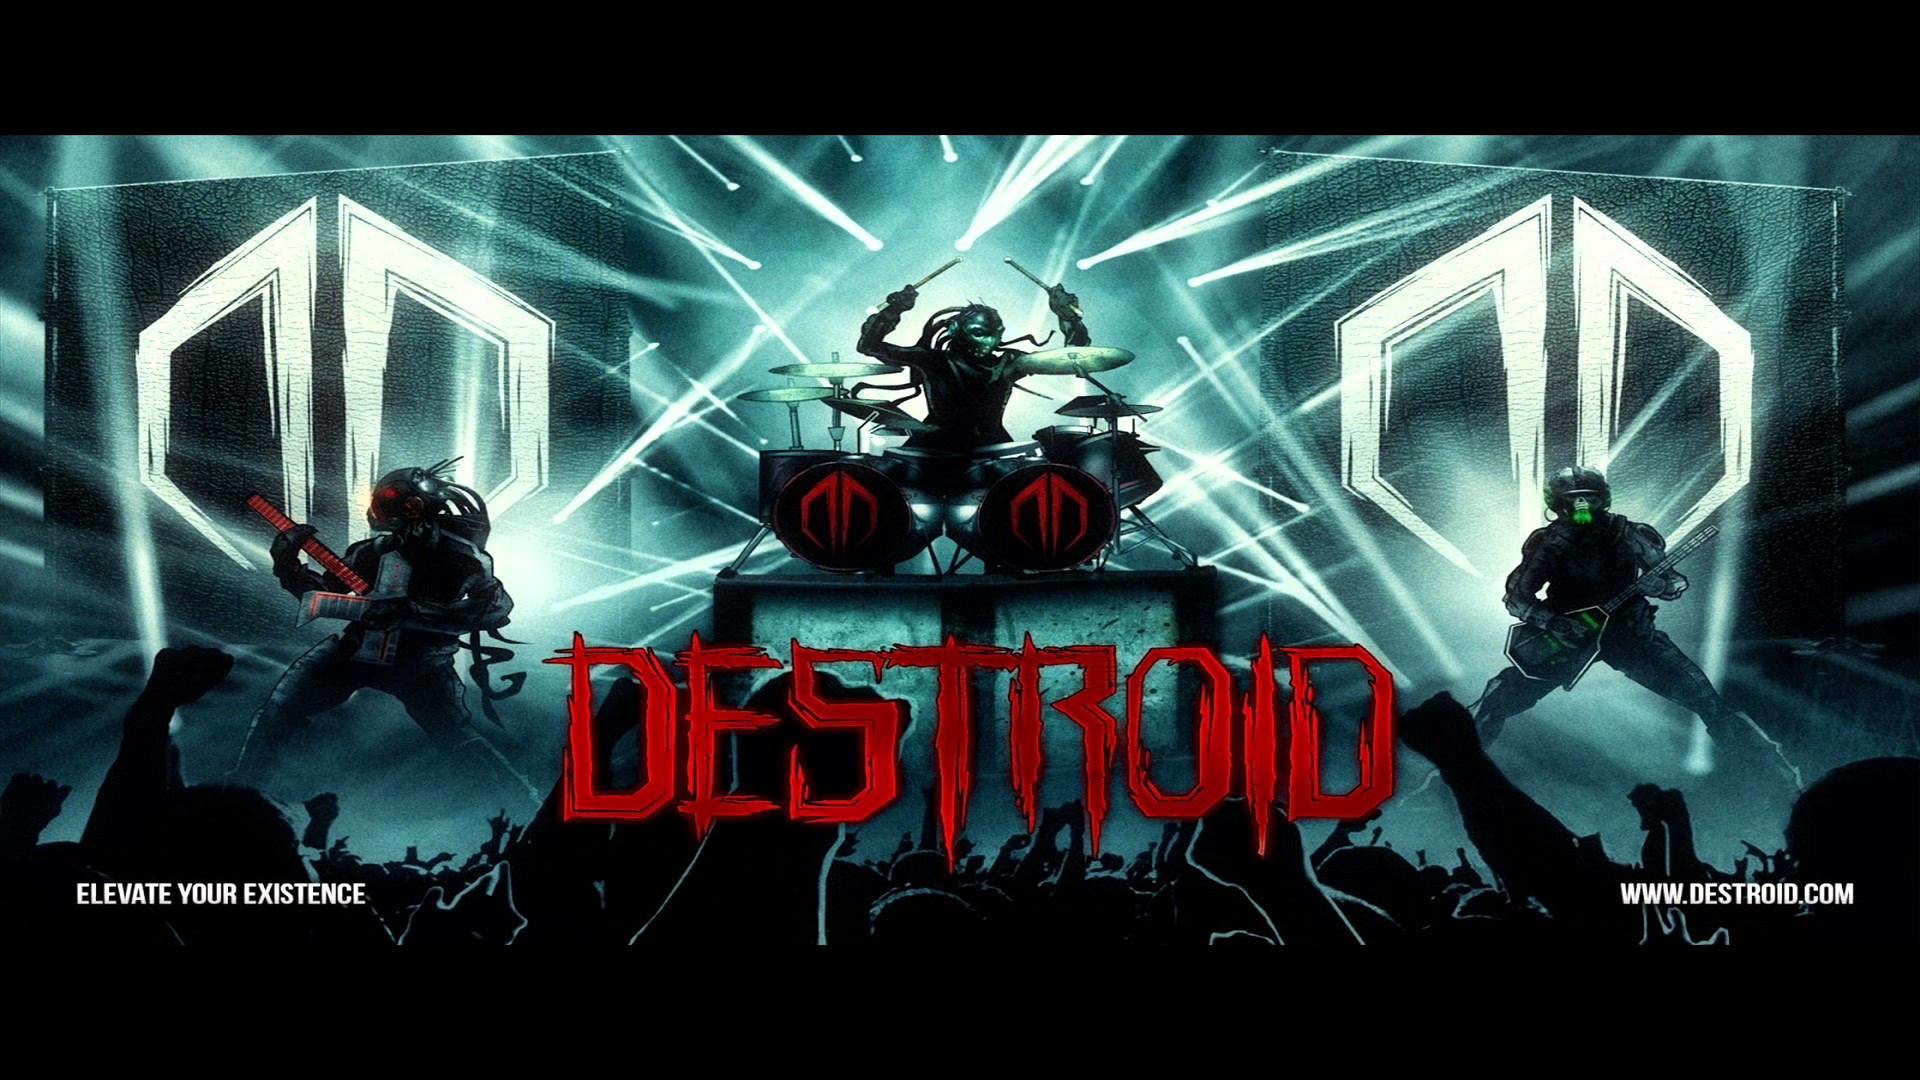 1920x1080 Displaying 15> Images For - Destroid Excision Wallpaper... Excision  Wallpapers